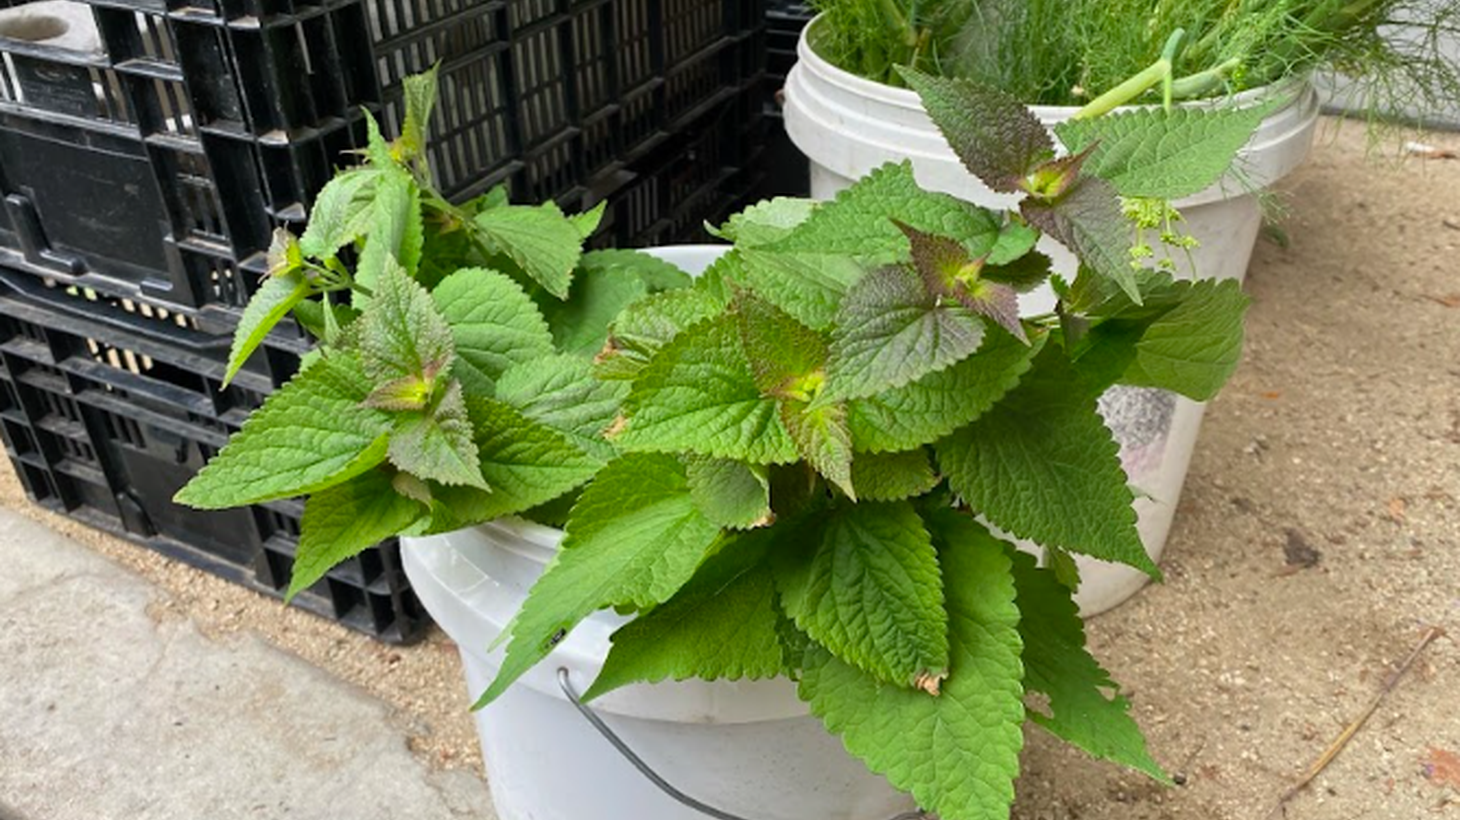 Anise hyssop at the Coleman Family Farm stand is a mint variety with large leaves and a slight licorice flavor.